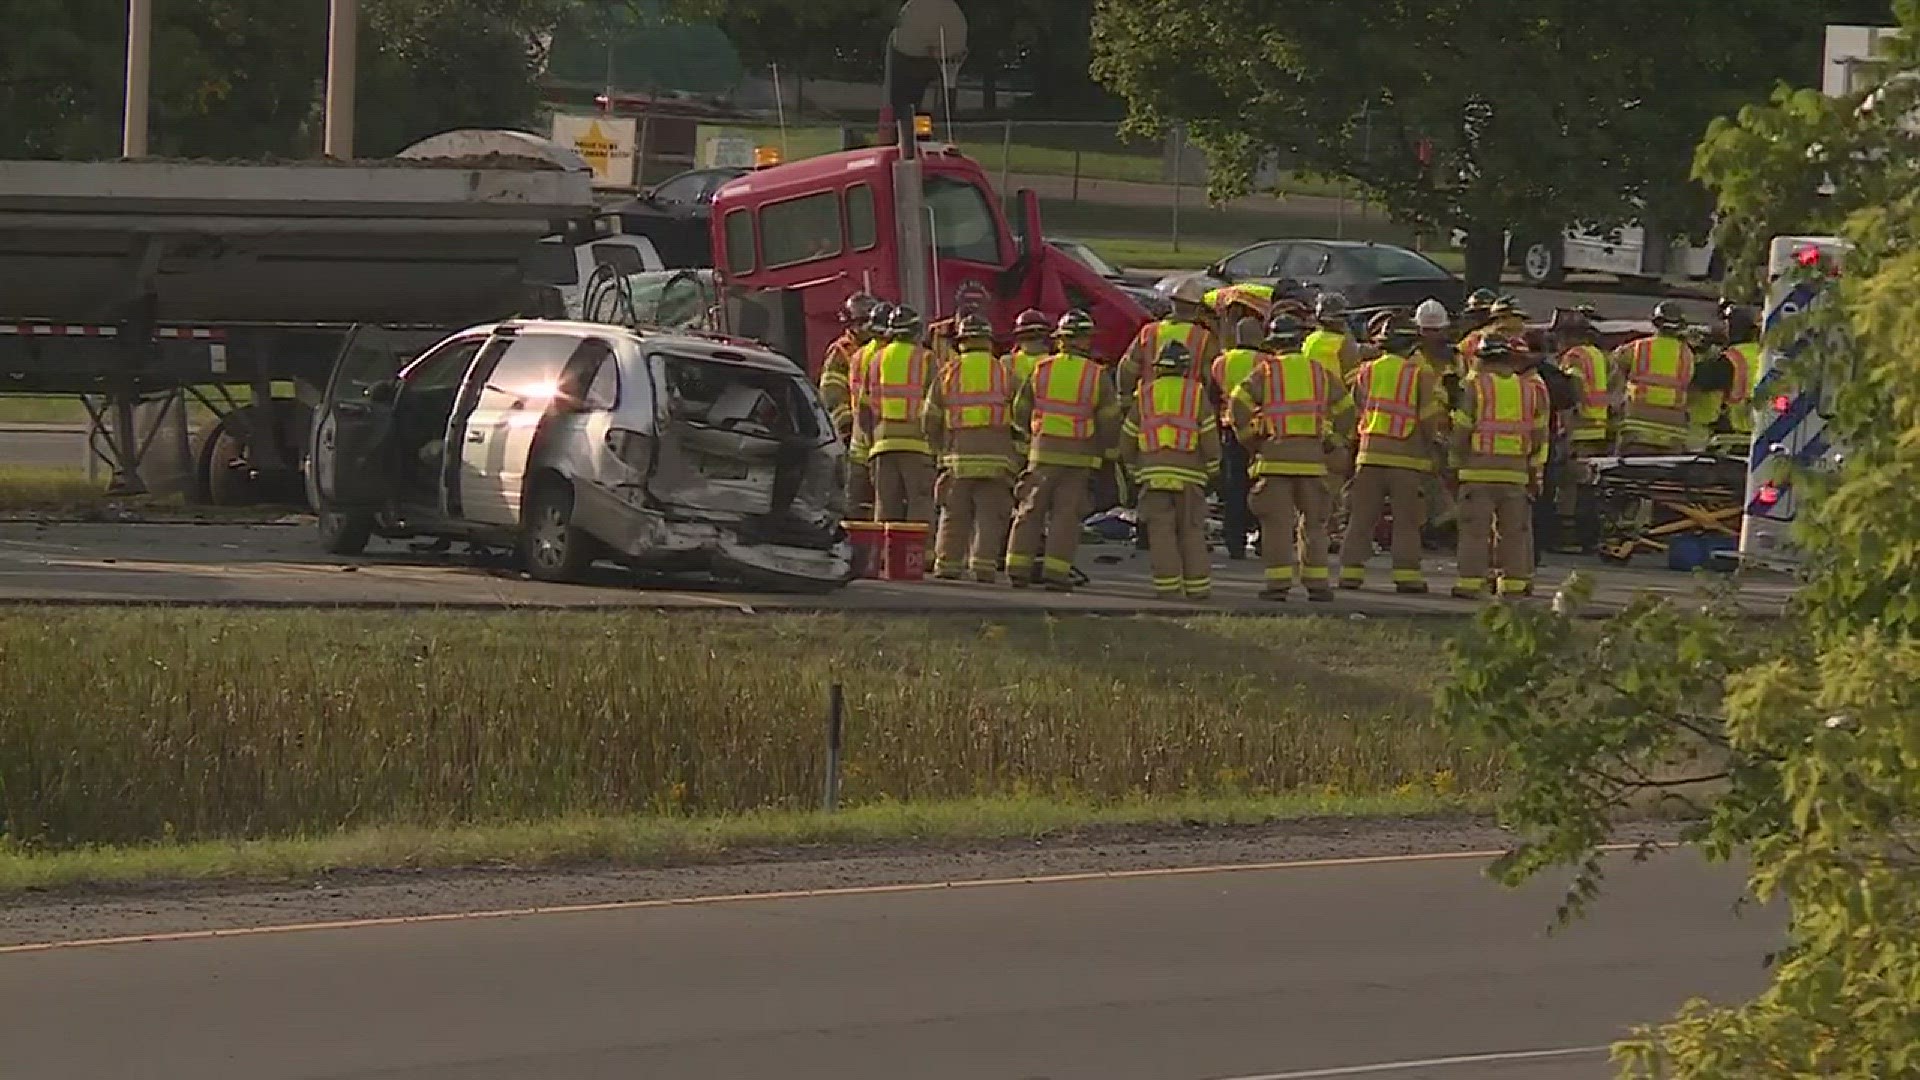 A young woman was killed and several others injured after a 6-car pileup on Highway 169 in New Hope Wednesday.